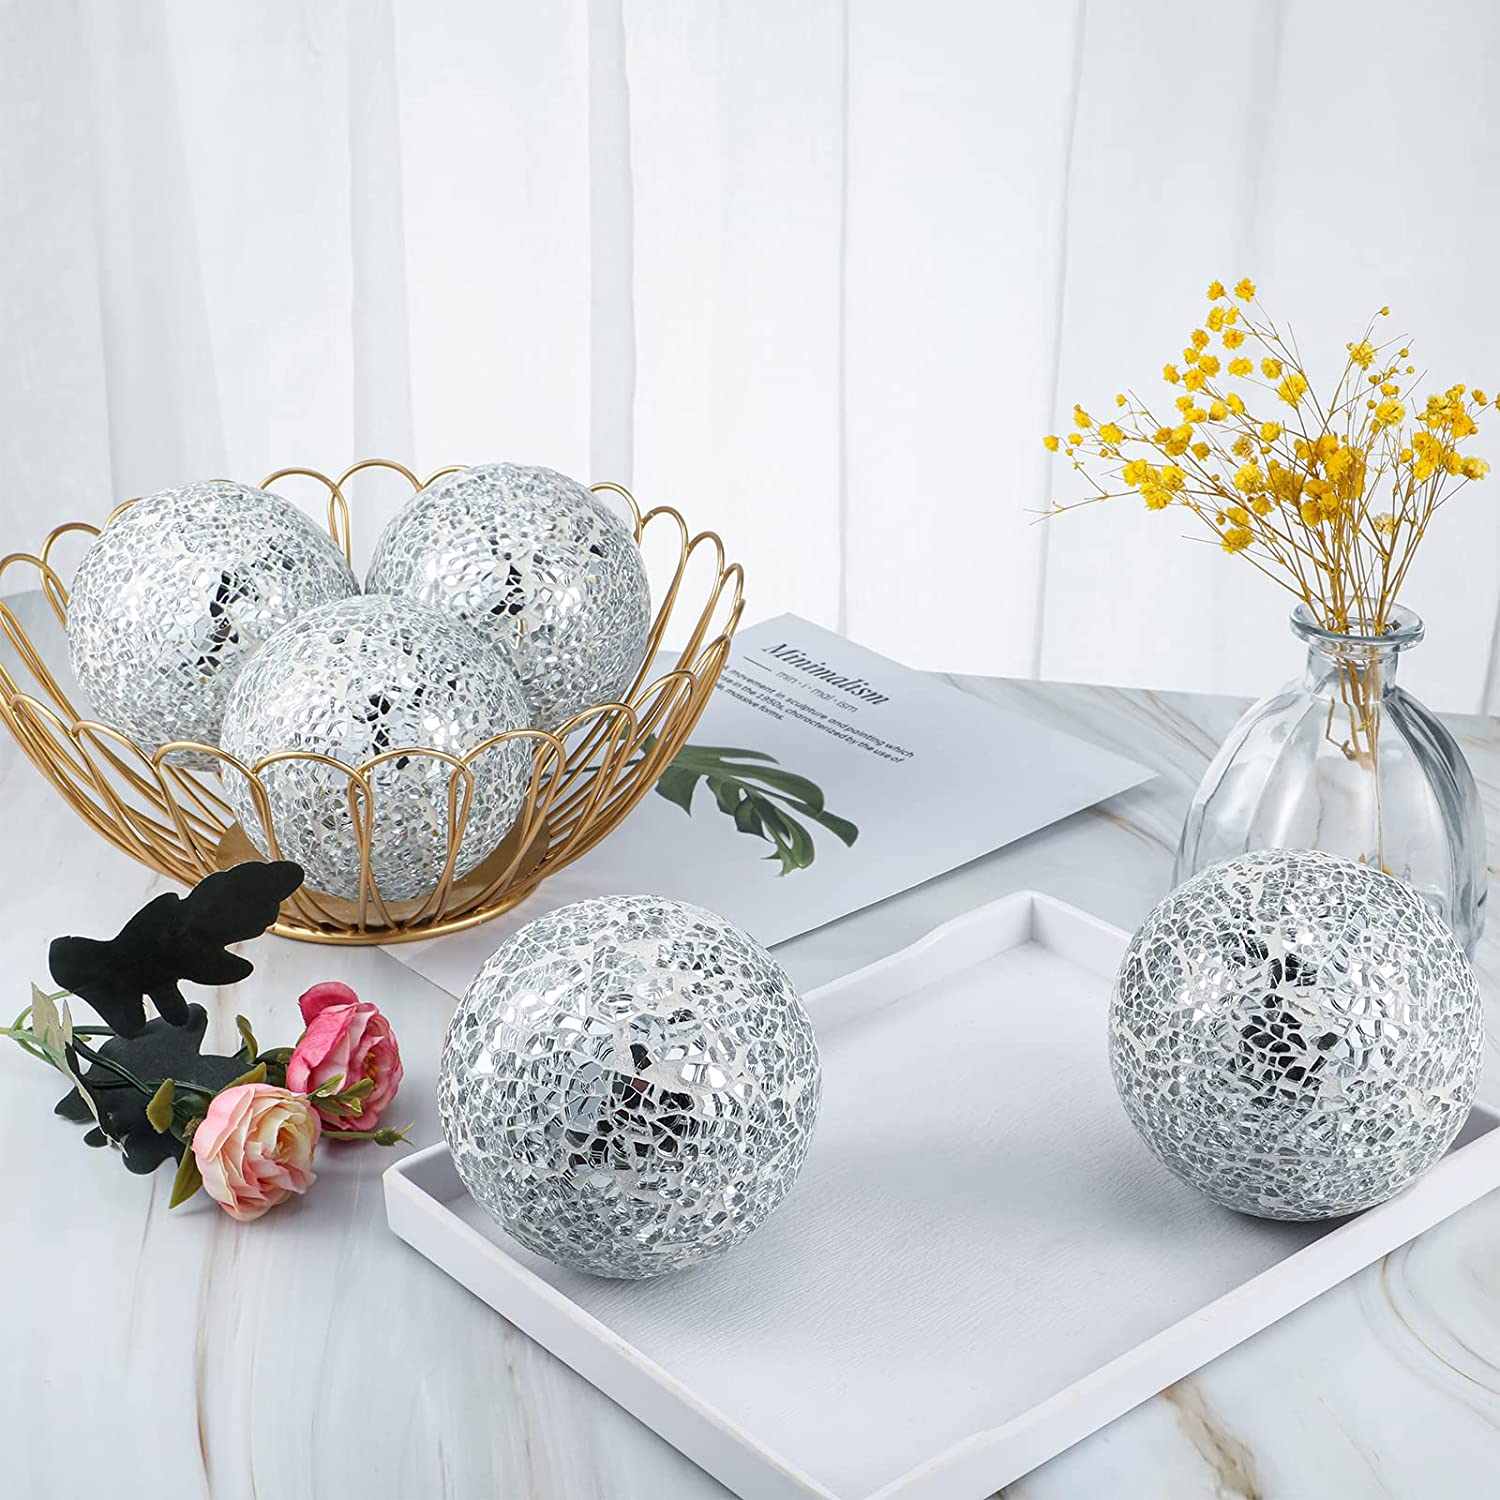 Linen Universe Crackle With Tiled Glass Mosaic Silver Sphere Ball